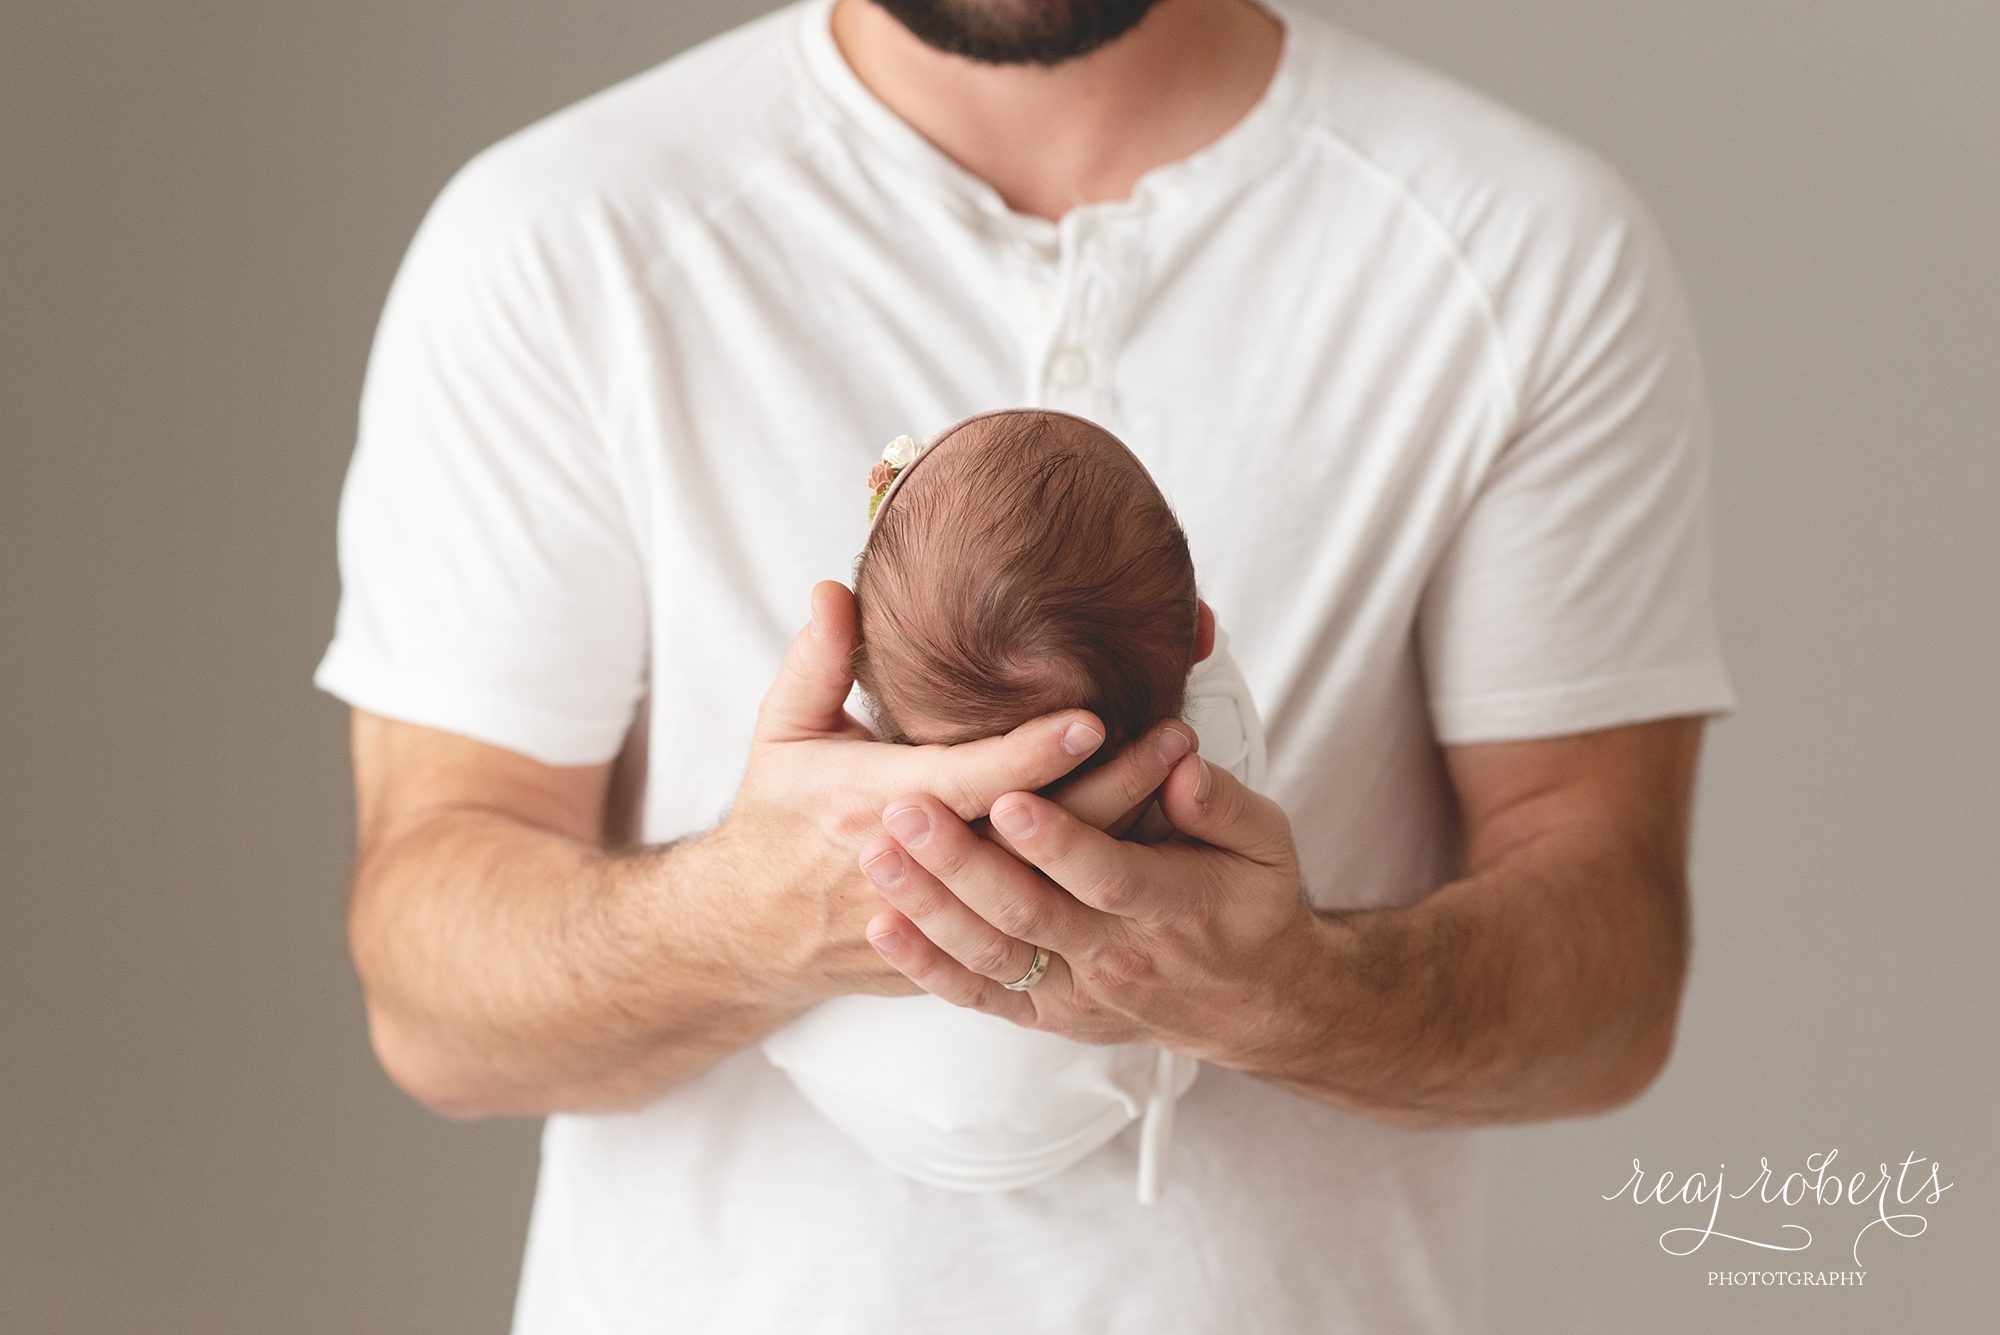 newborn baby held in father's hands | Reaj Roberts Photography